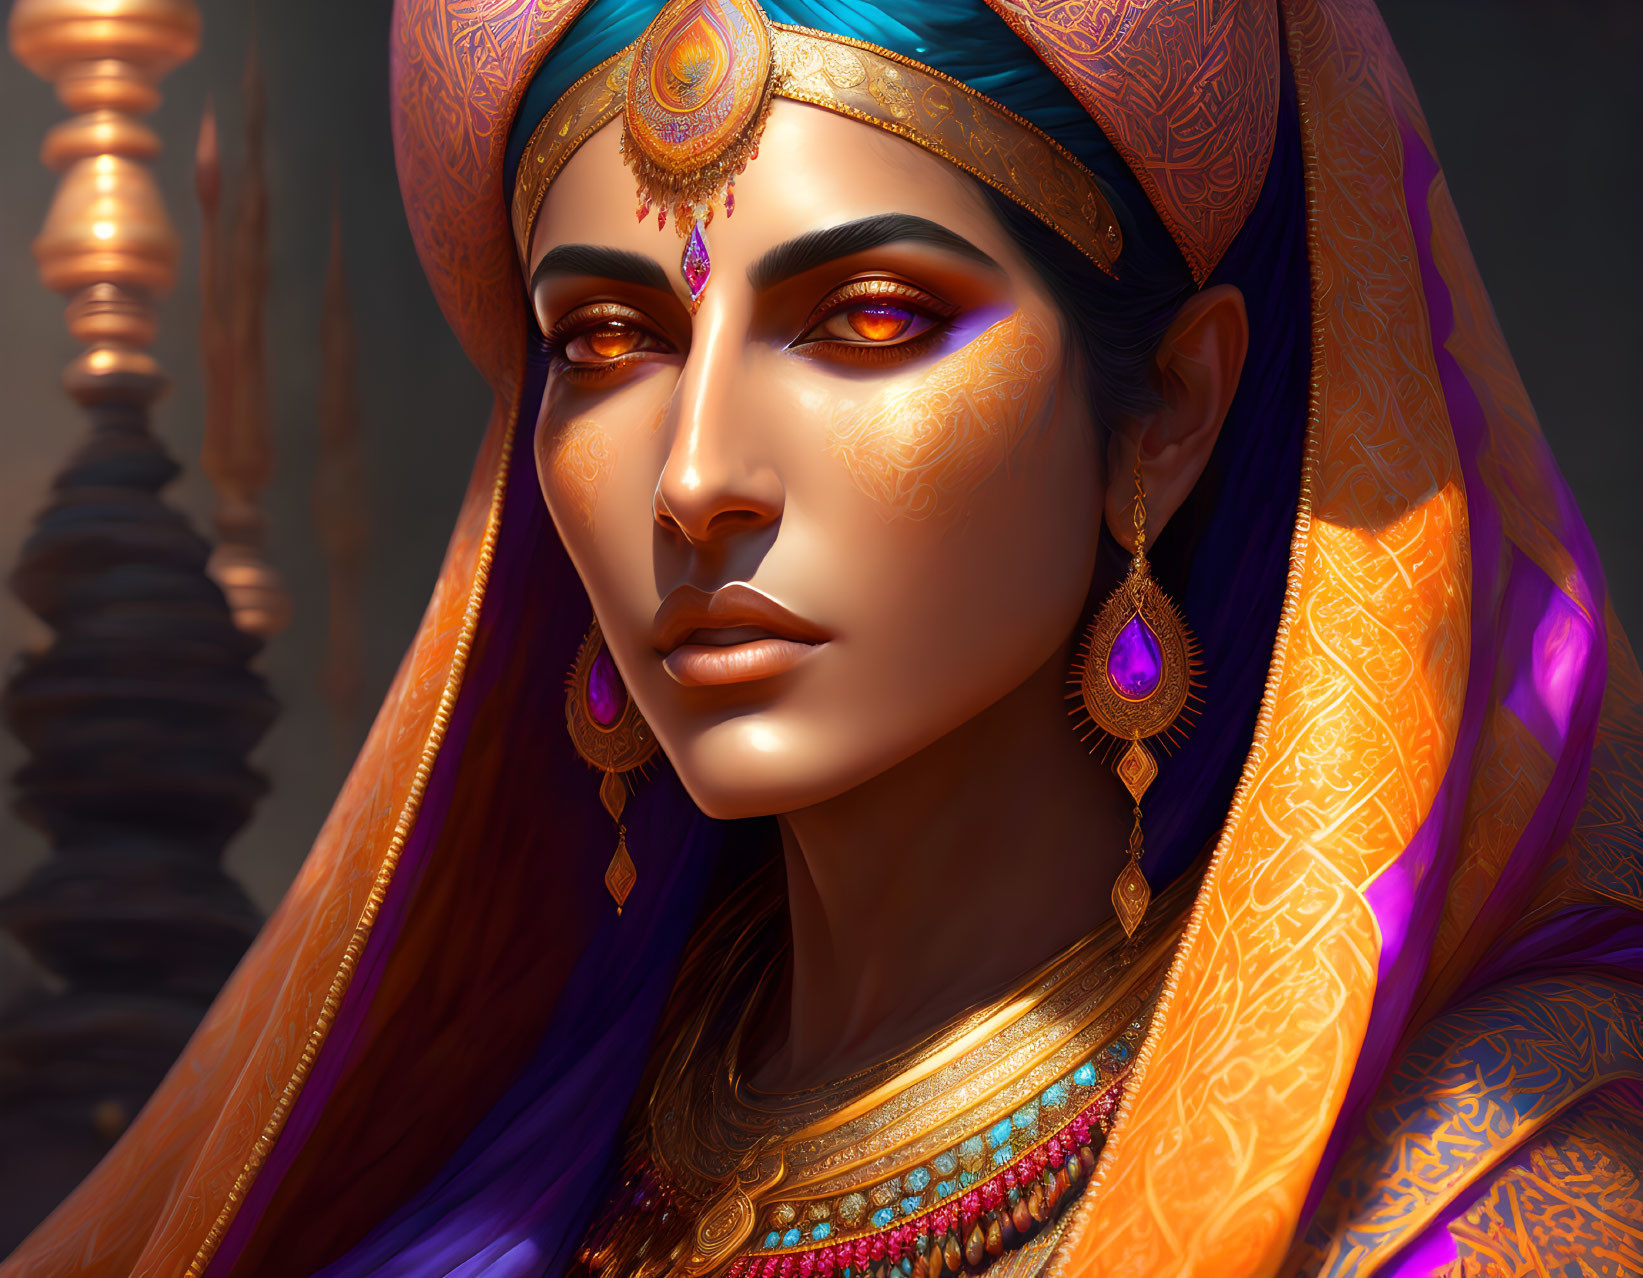 Digital portrait of woman in golden makeup and orange attire with ornate jewelry.